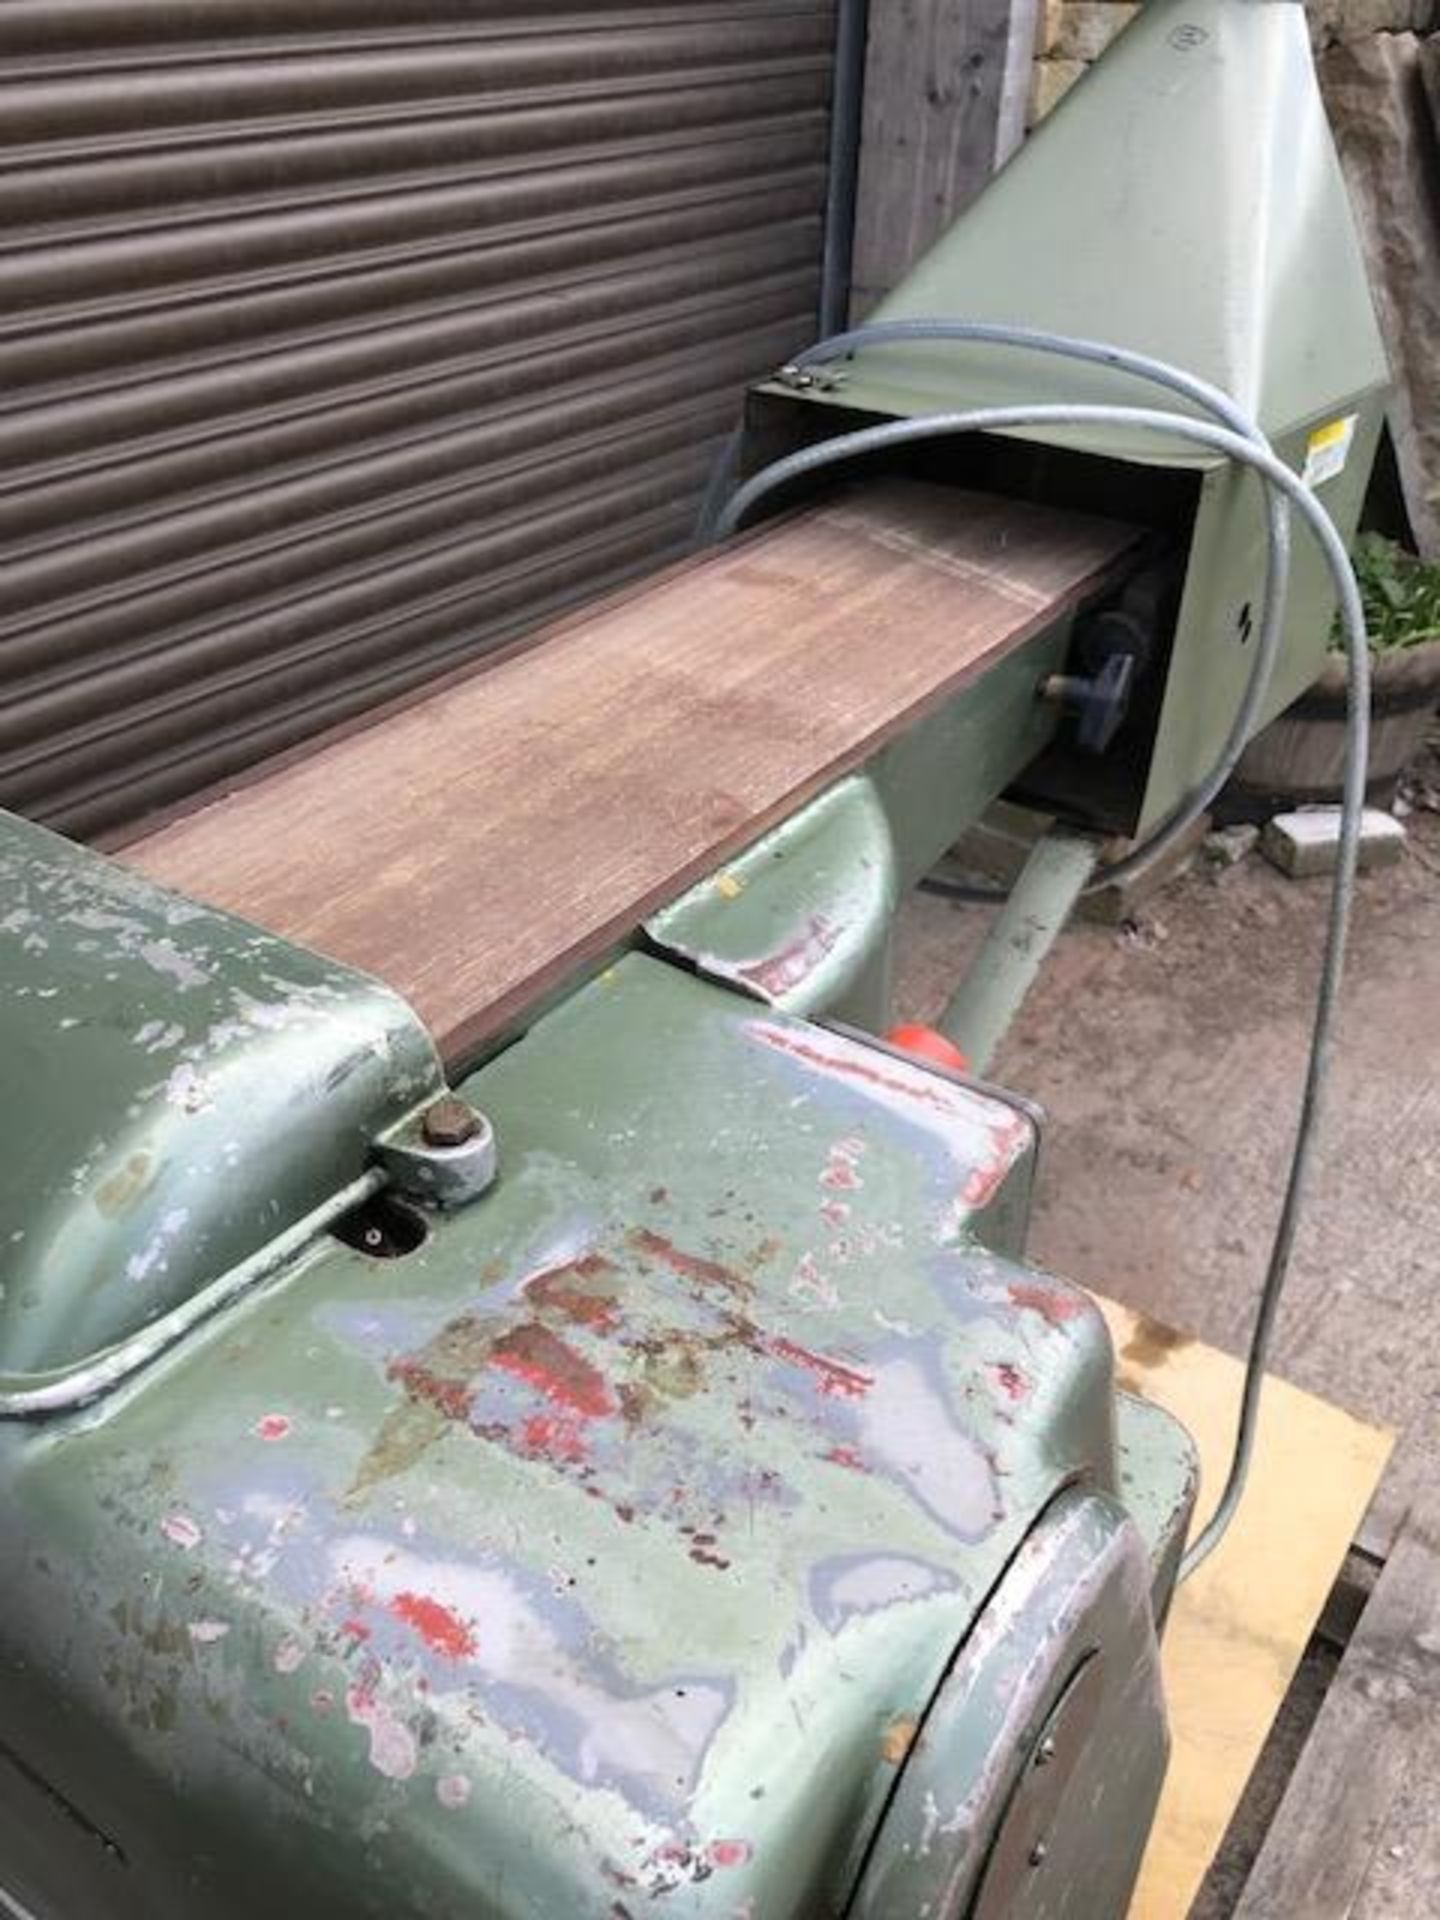 Cooksley Belt Linisher, with dust shoot (vendors comments - good condition), lot location - - Image 3 of 5